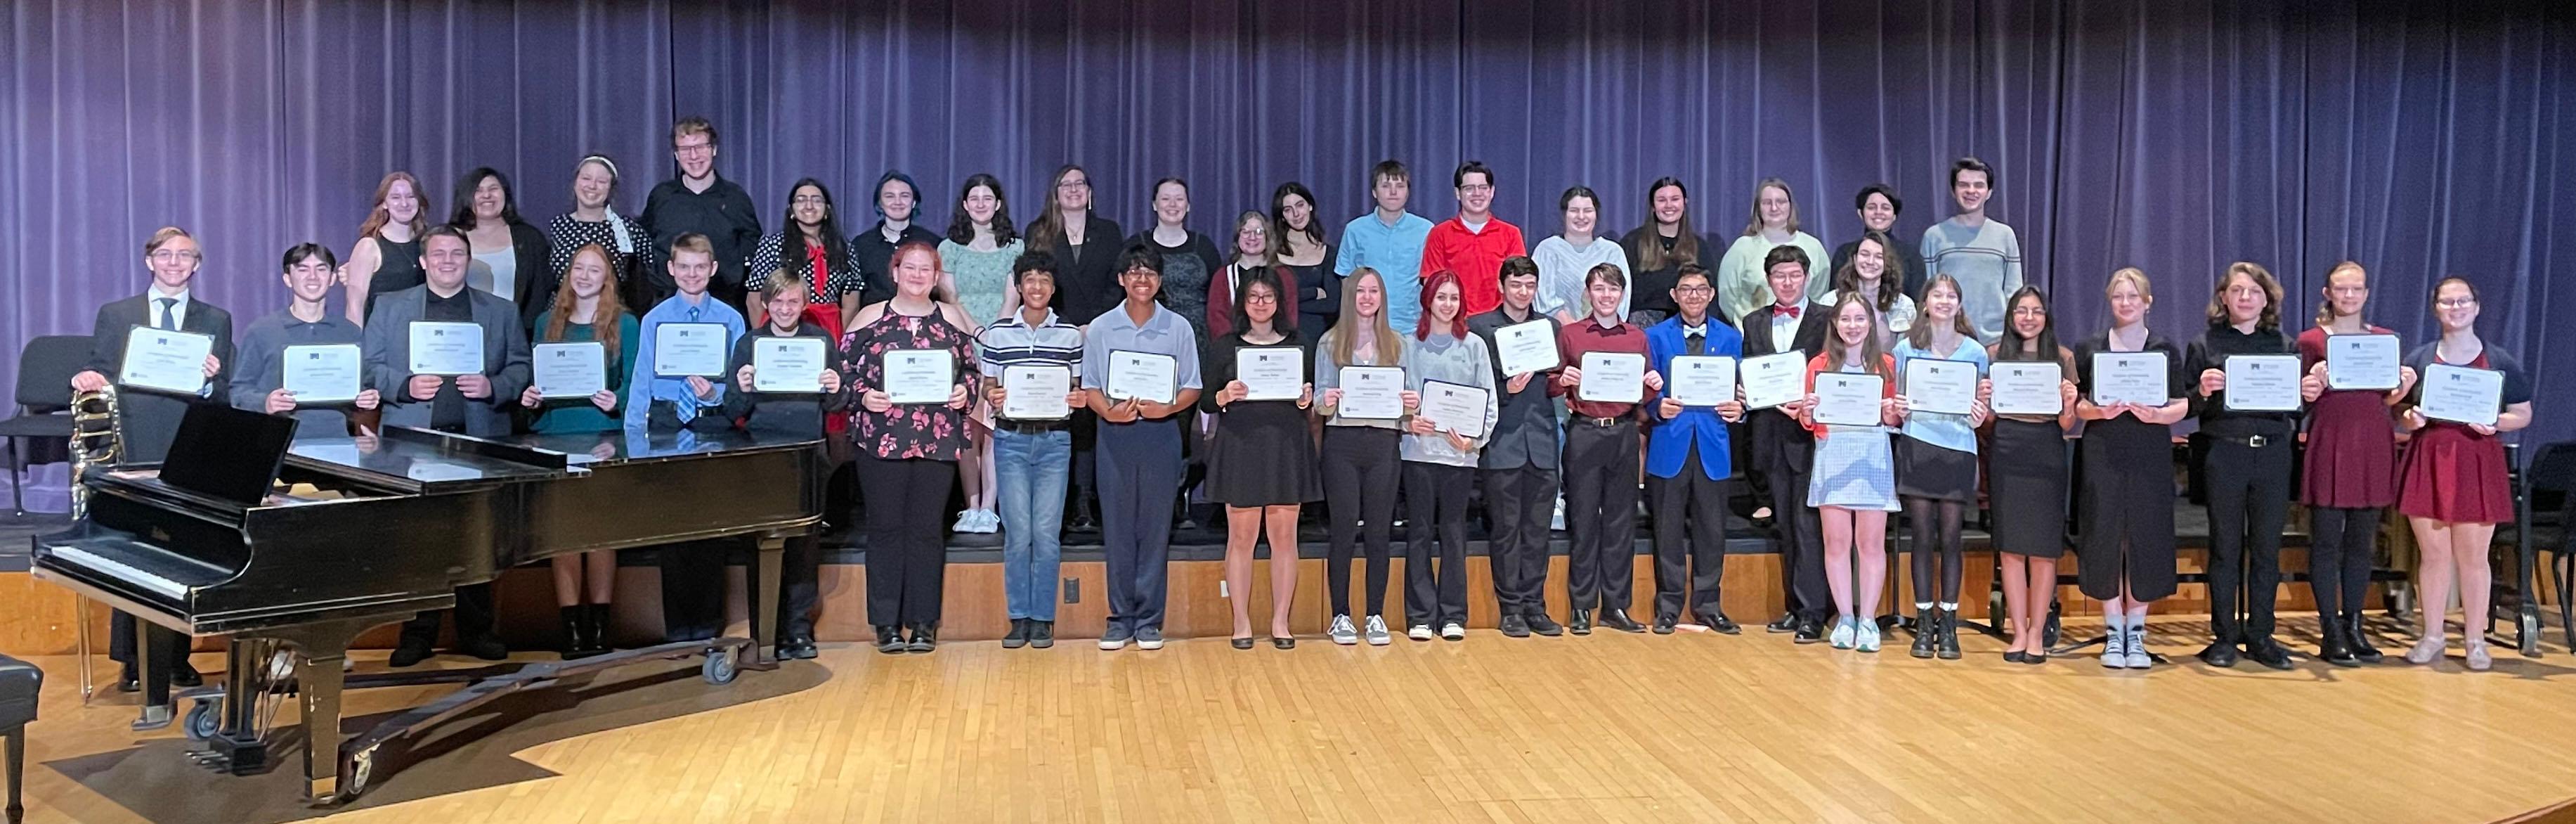 Willowbrook hosts Tri-M Honor Society induction ceremony 